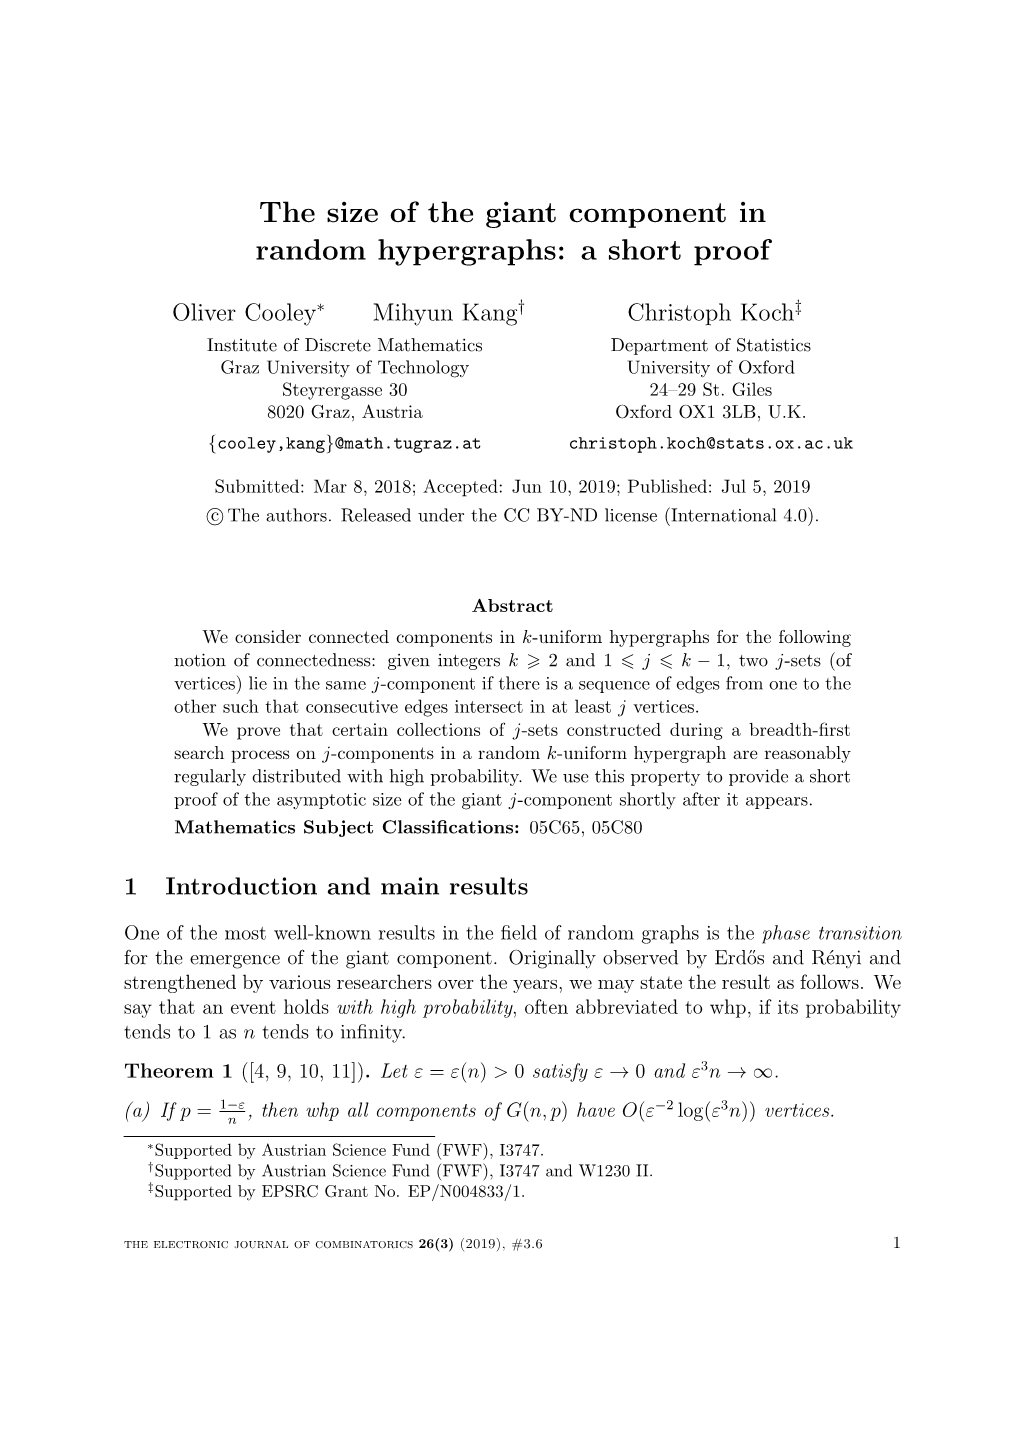 The Size of the Giant Component in Random Hypergraphs: a Short Proof